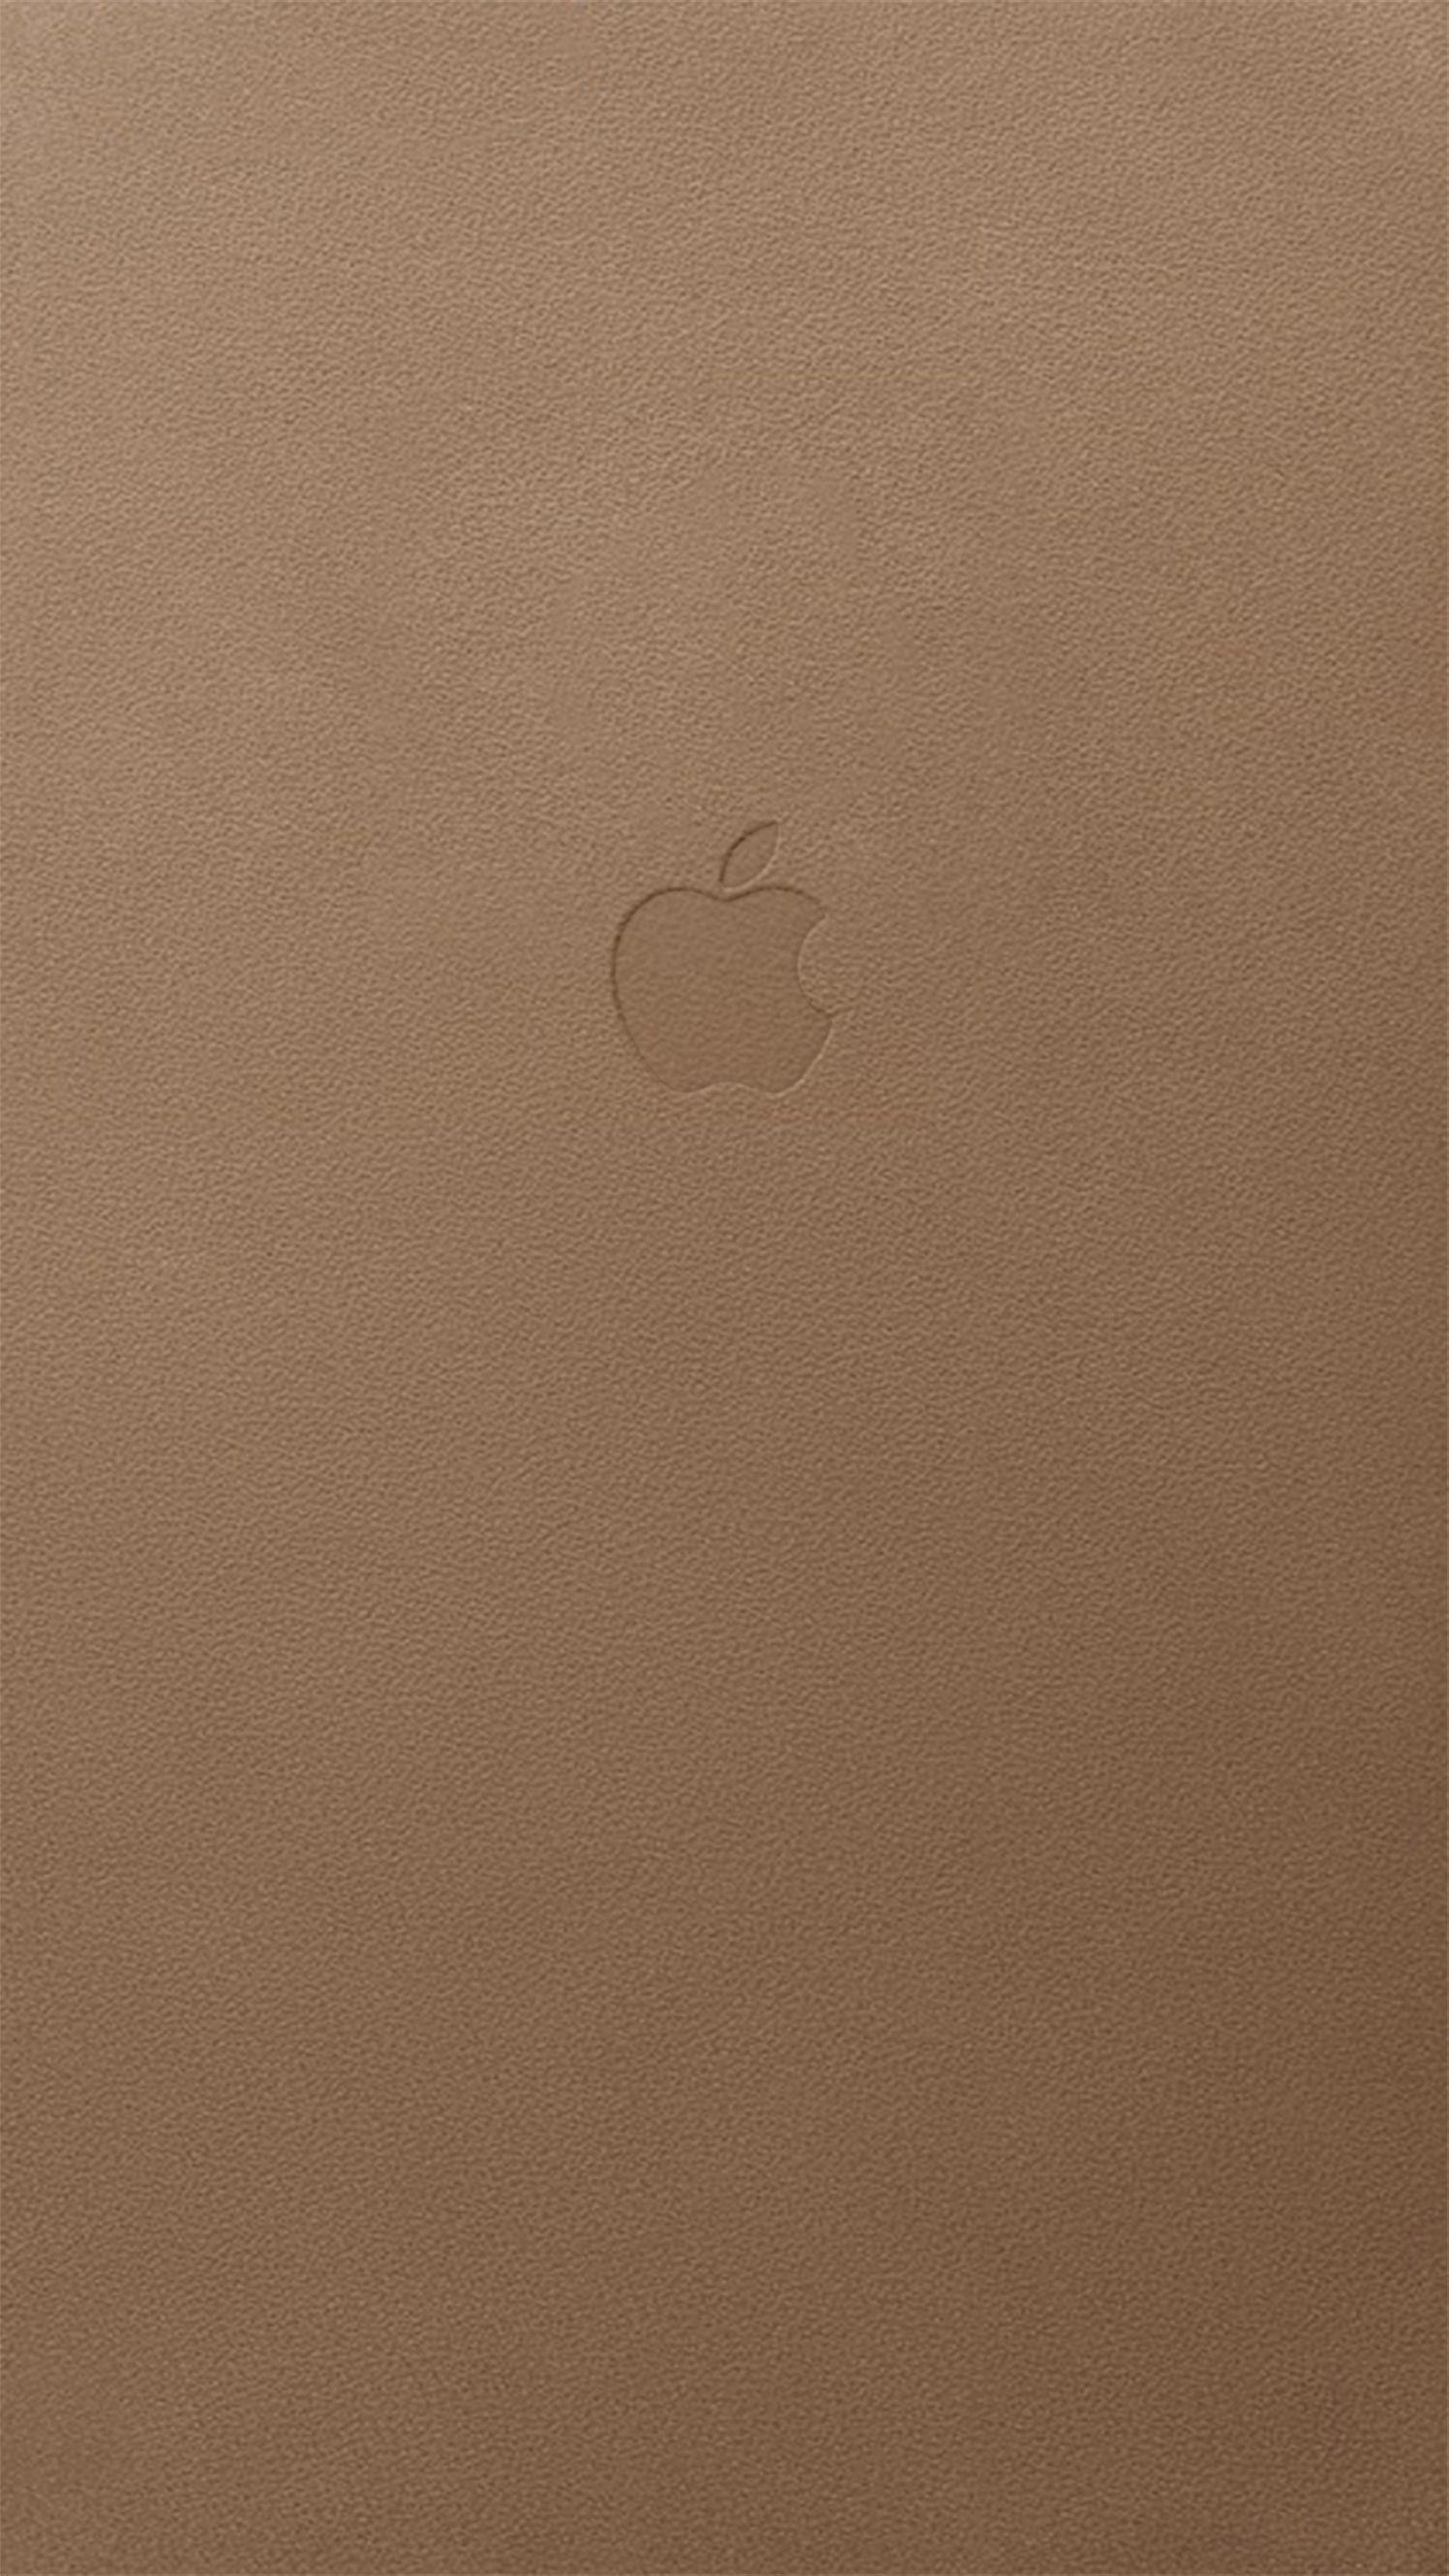 These wallpaper will match your Apple leather case